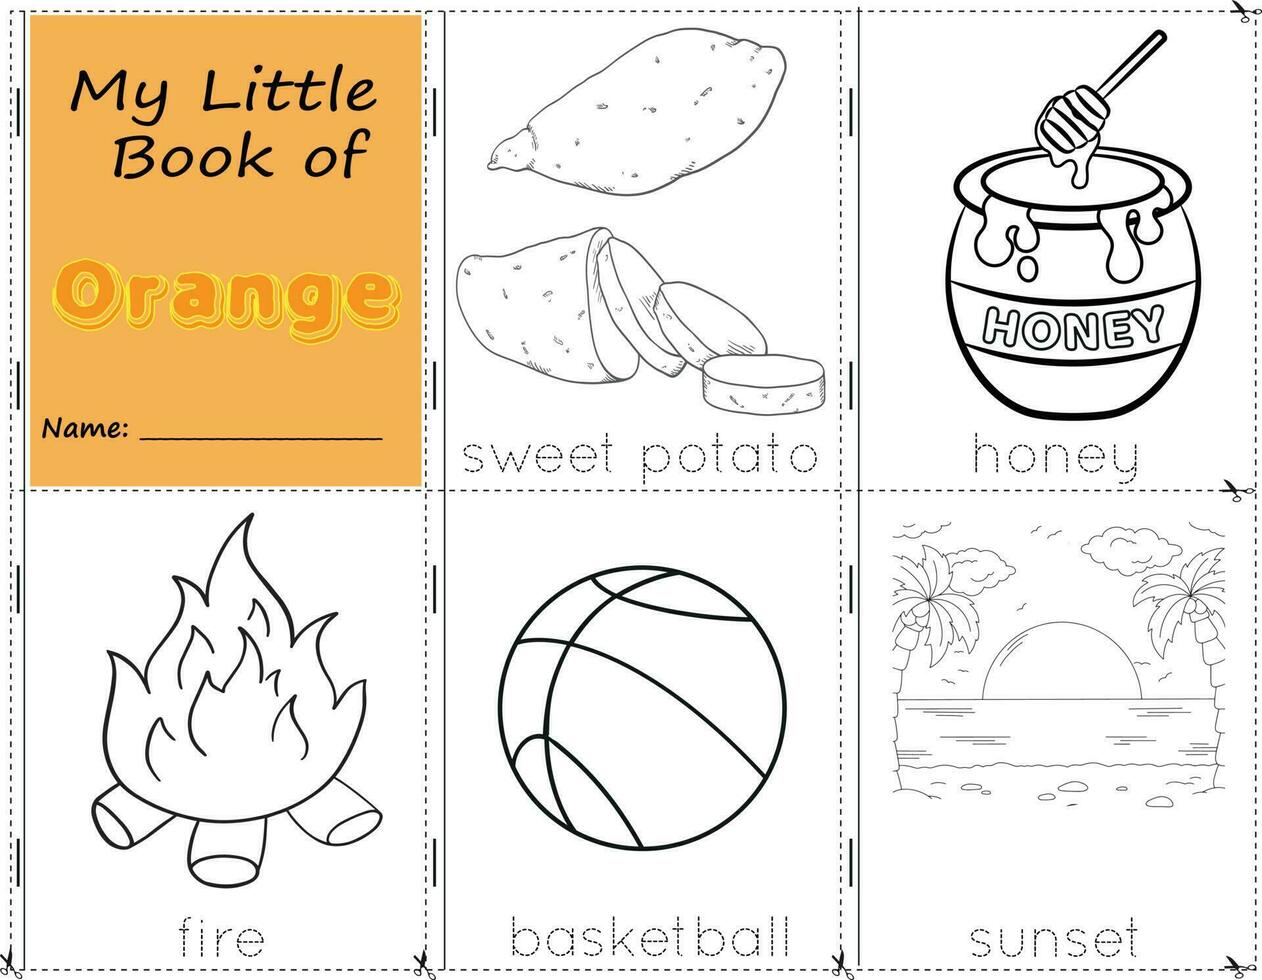 My Little Book of Orange Color objects orange to paint them as they are in real life. Education worksheet for children. sweet potato, honey, fire, basketball, and sunset vector